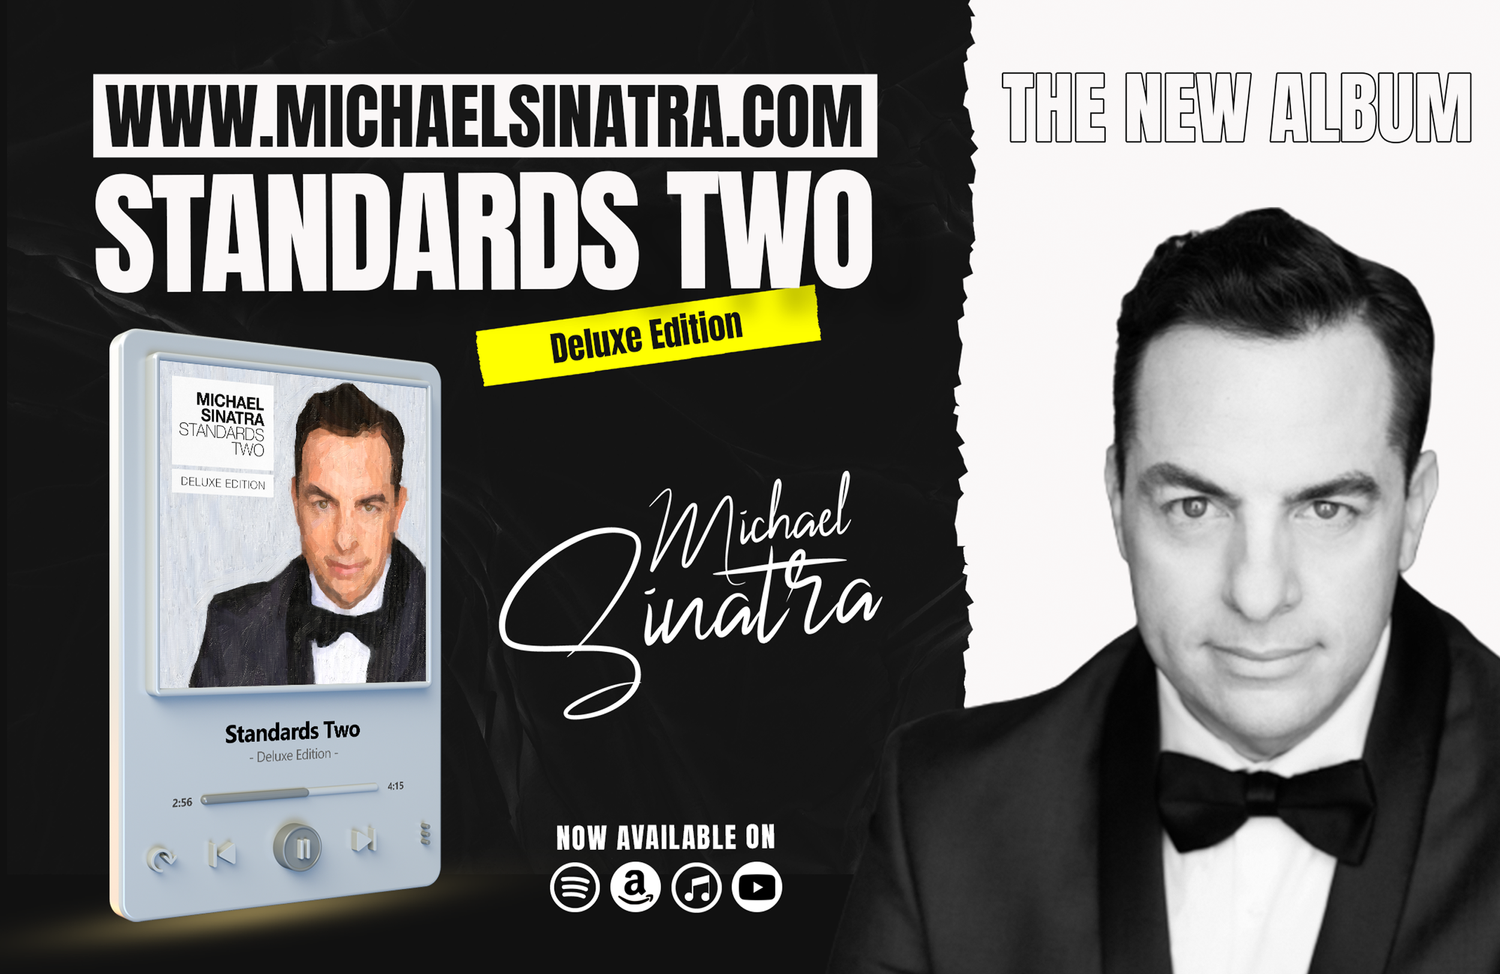 Michael Sinatra | Frank Sinatra Tribute | Booking Info - Official Site 